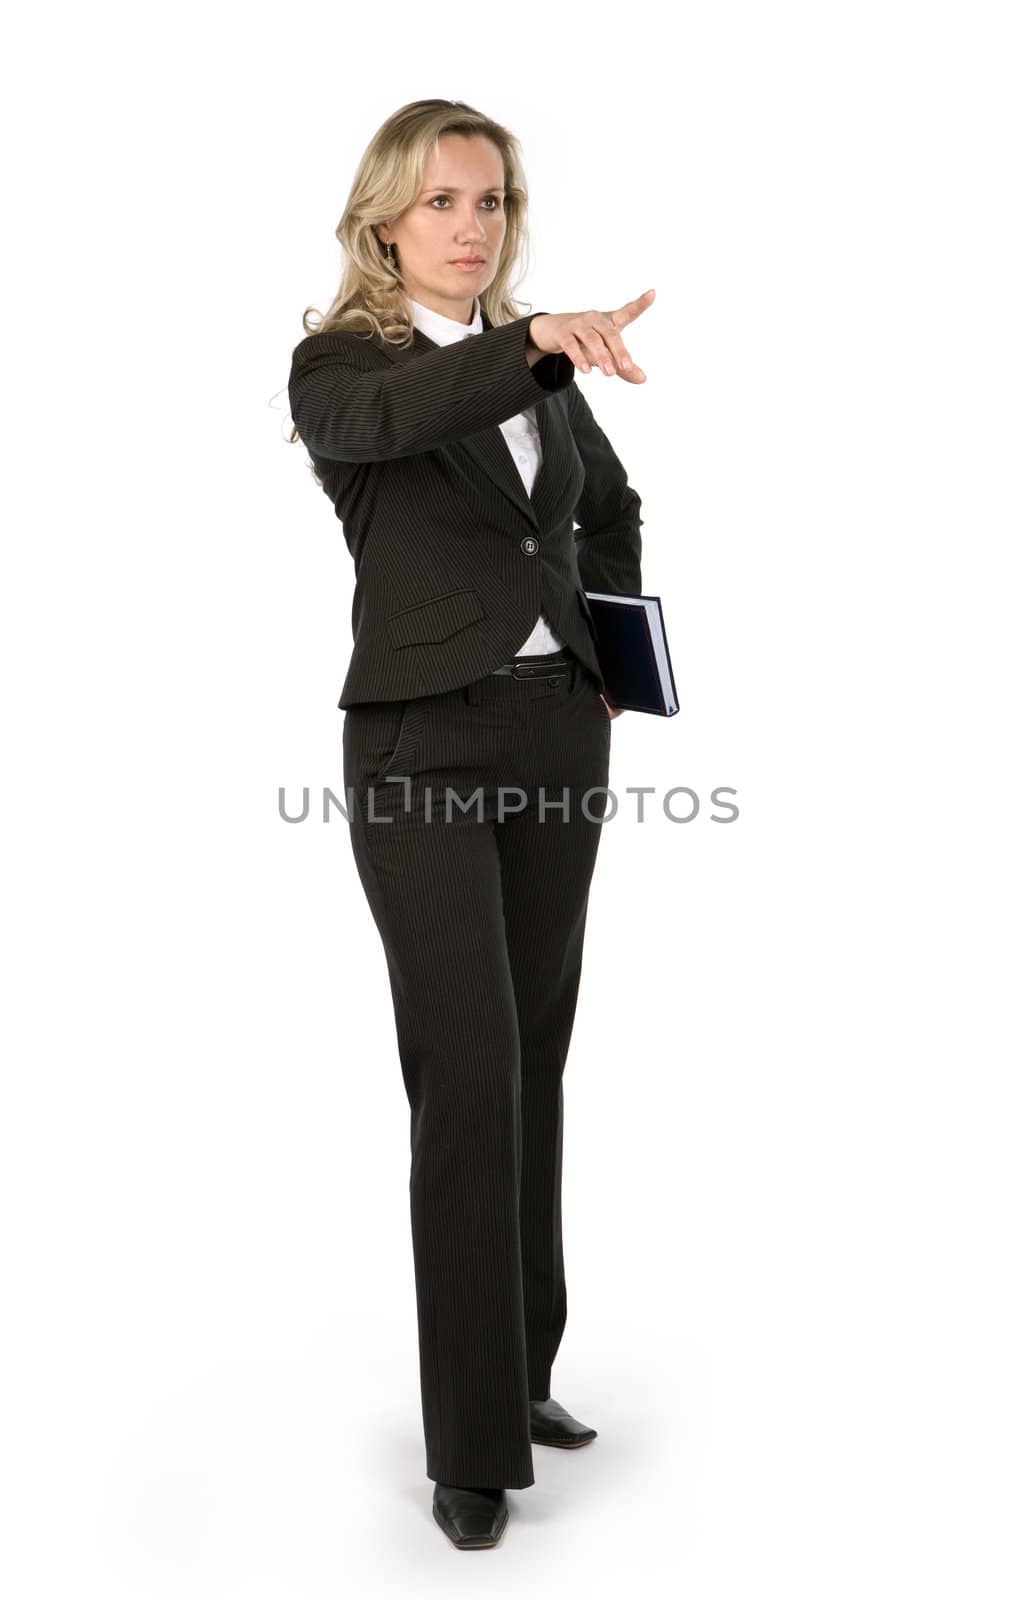 Businesswoman with book holding in hand on white background